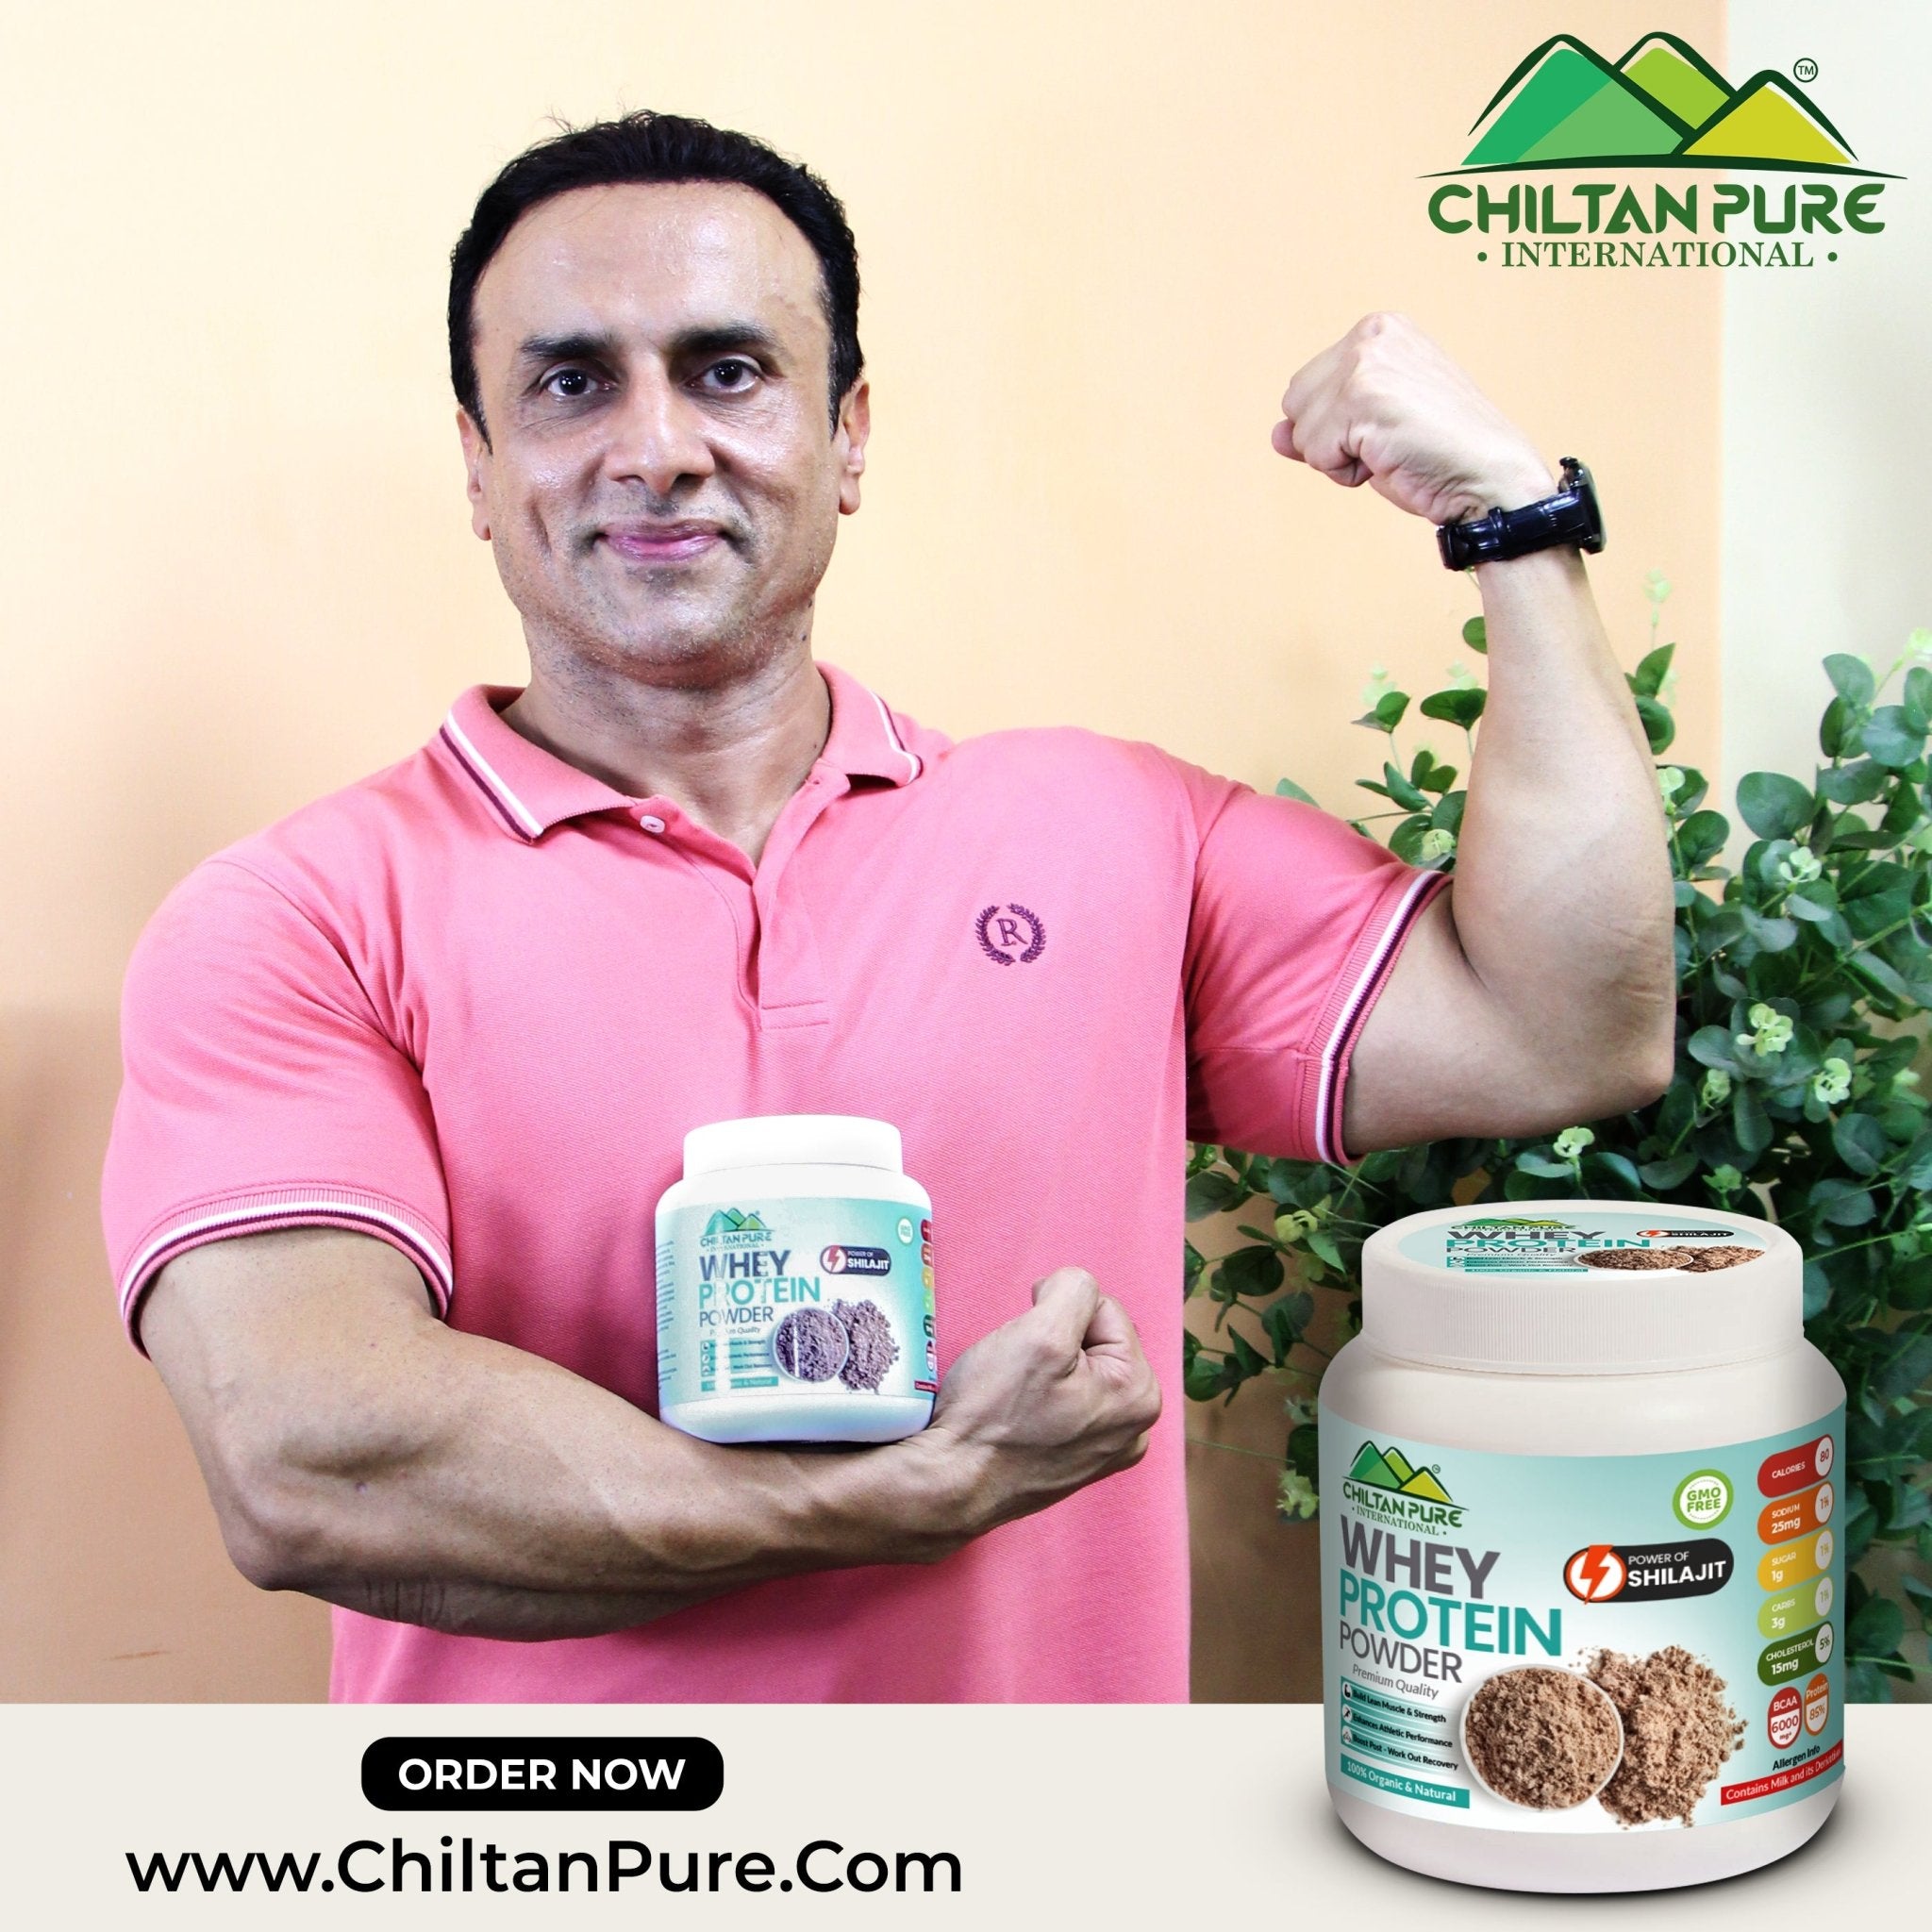 Whey Protein Powder - Power OF Shilajit, Build Lean Muscle & Strength, Enhances Athletic Performance, Boosts Posts Workout Recovery! - ChiltanPure